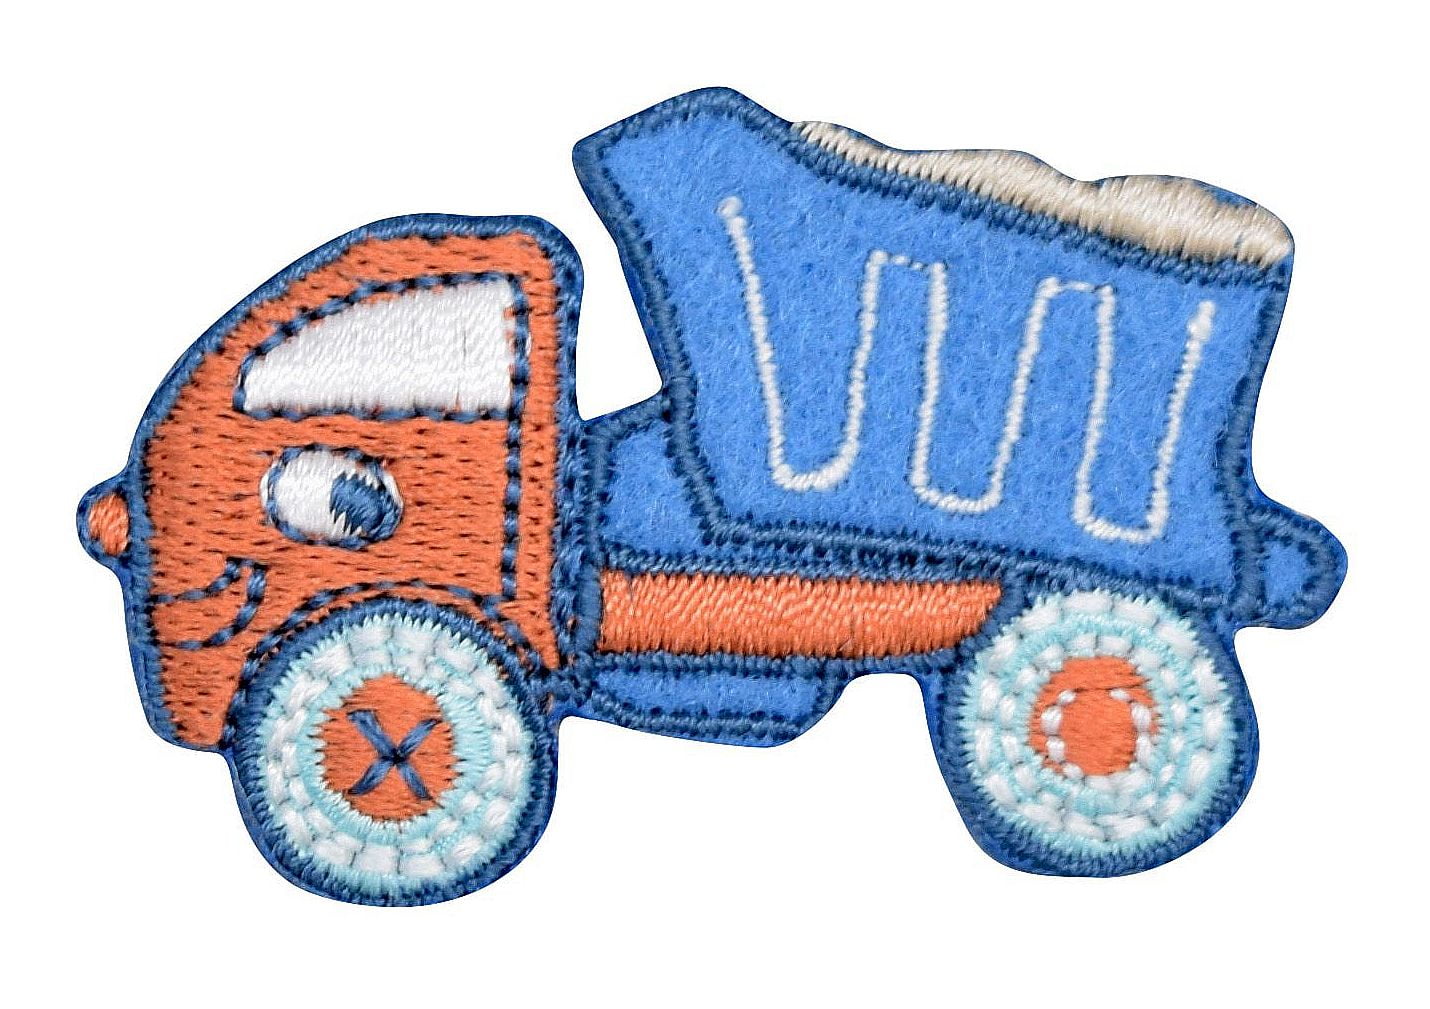 CEMENT TRUCK Iron-On Patch